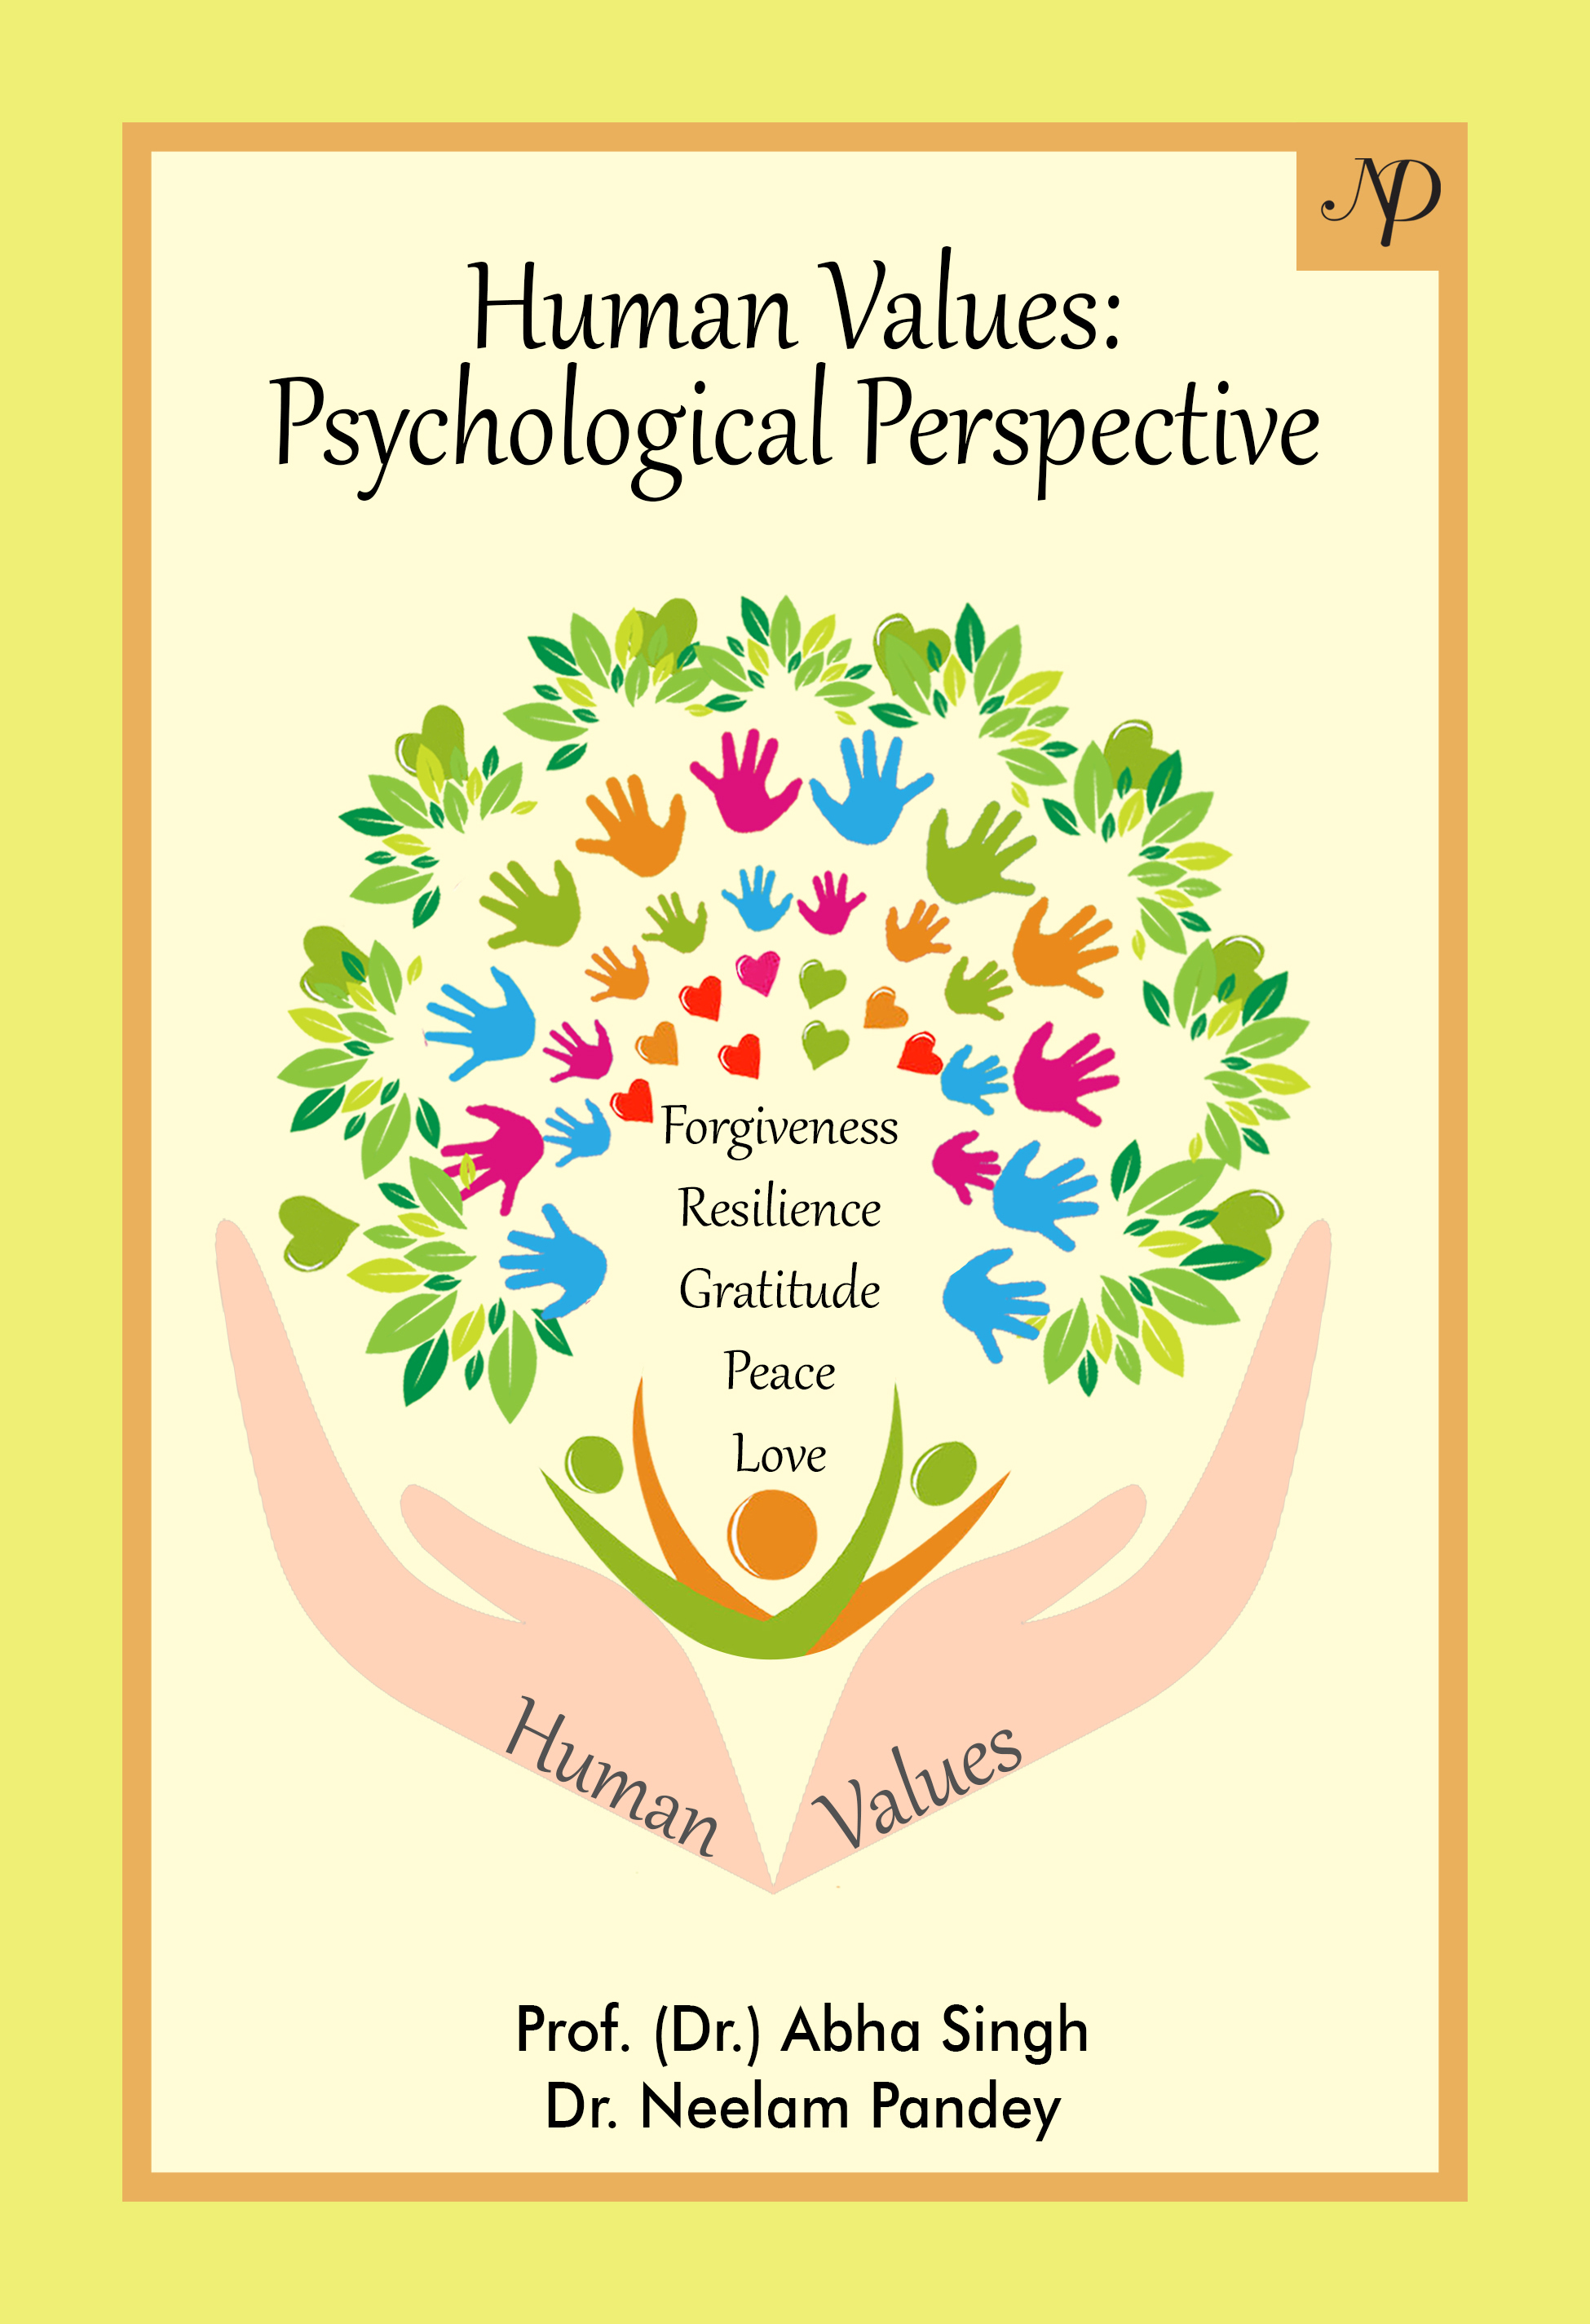 Human Values: Psychological Perspective